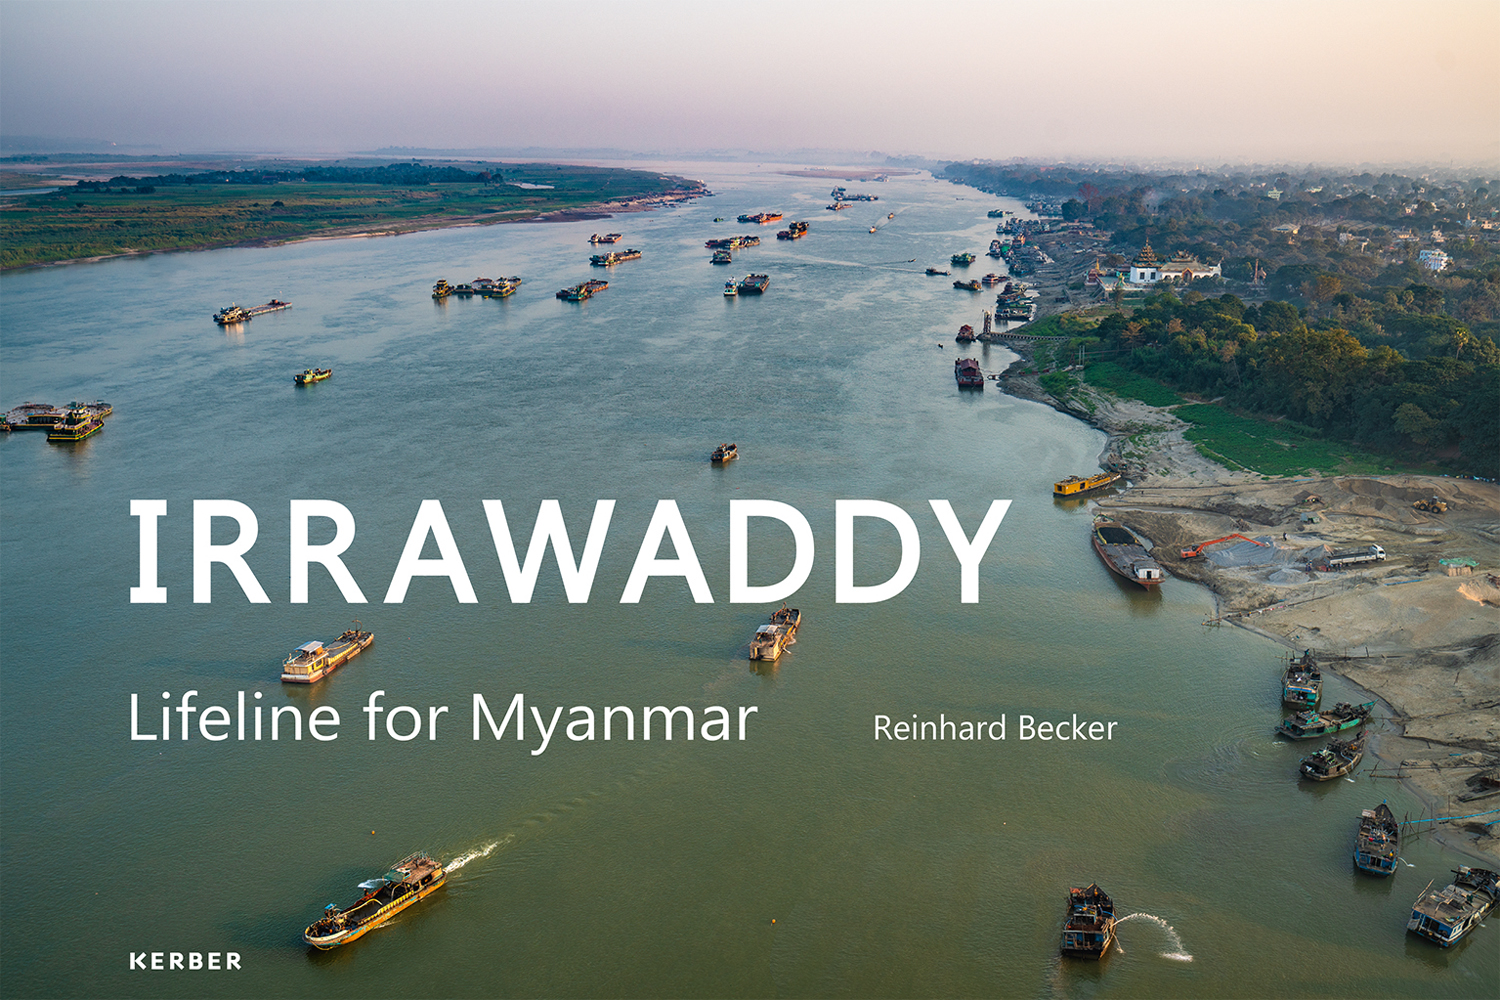 Aerial shot of boats sailing down the Irrawaddy river in Myanmar, IRRAWADDY Lifeline For Myanmar in white font to lower left.